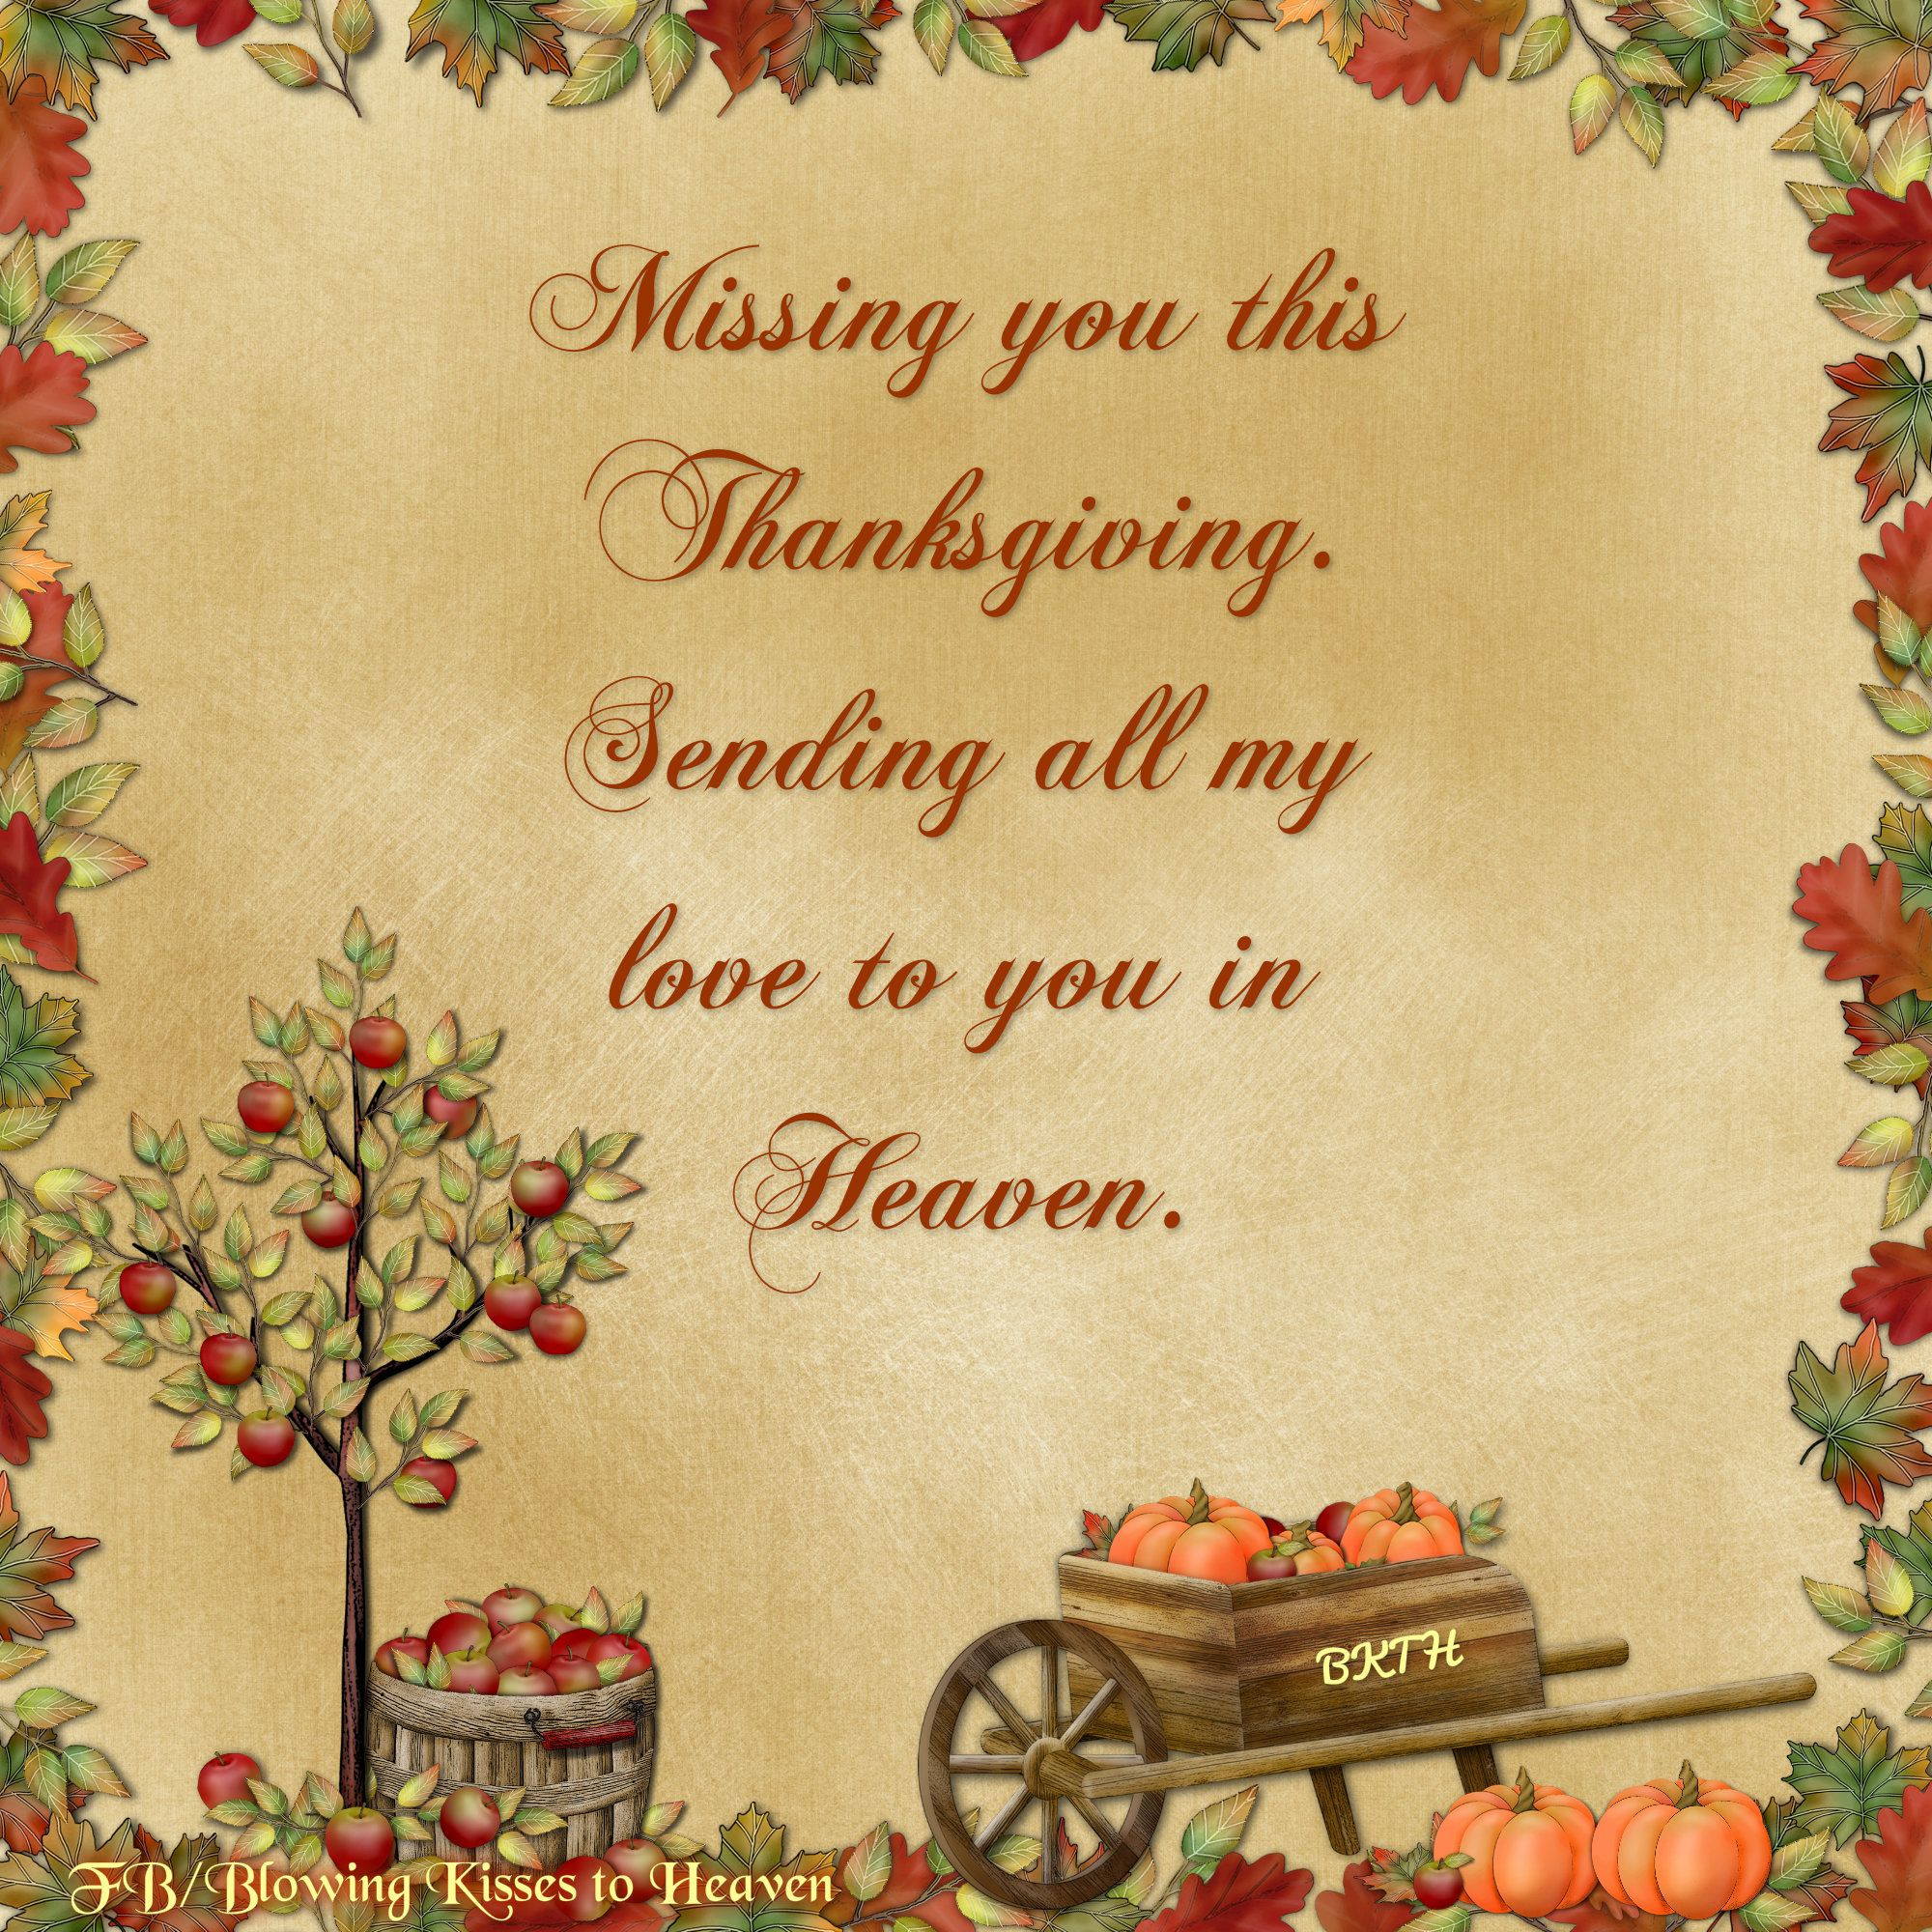 Thanksgiving Quotes For Parents
 Missing you this Thanksgiving